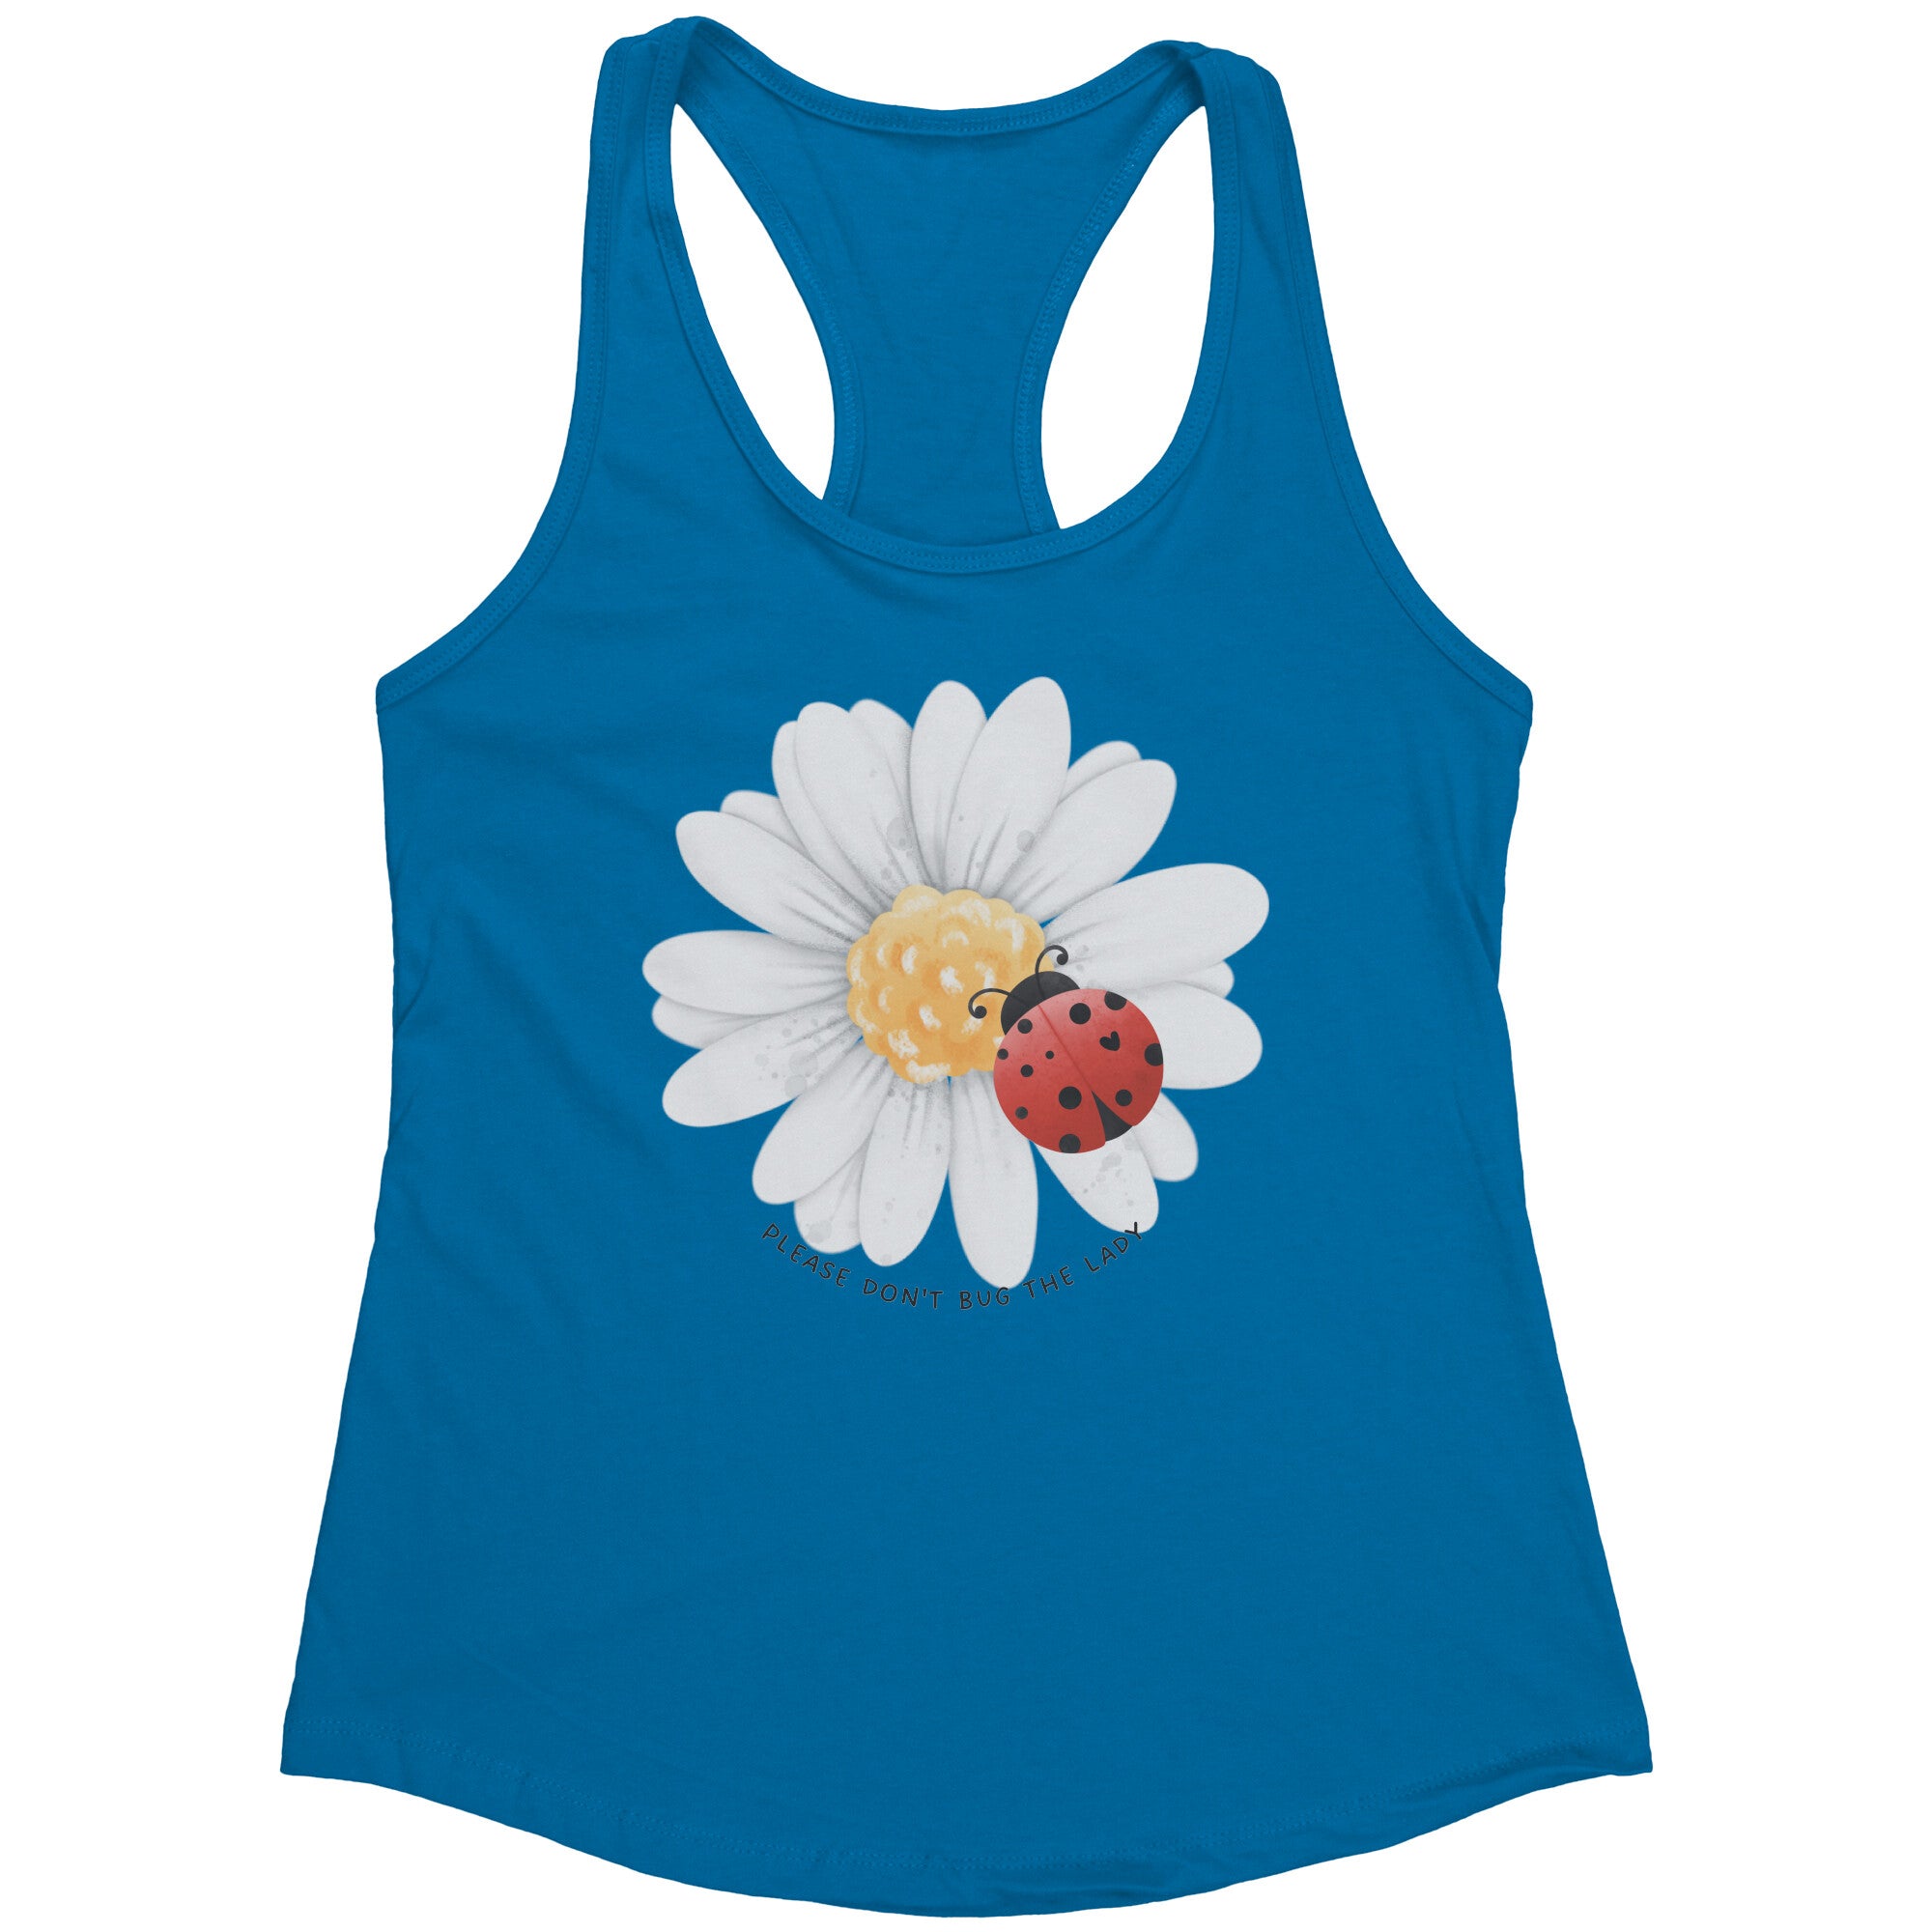 Please Don't Bug The Lady Funny Ladybug Tank For Women Garden Gift